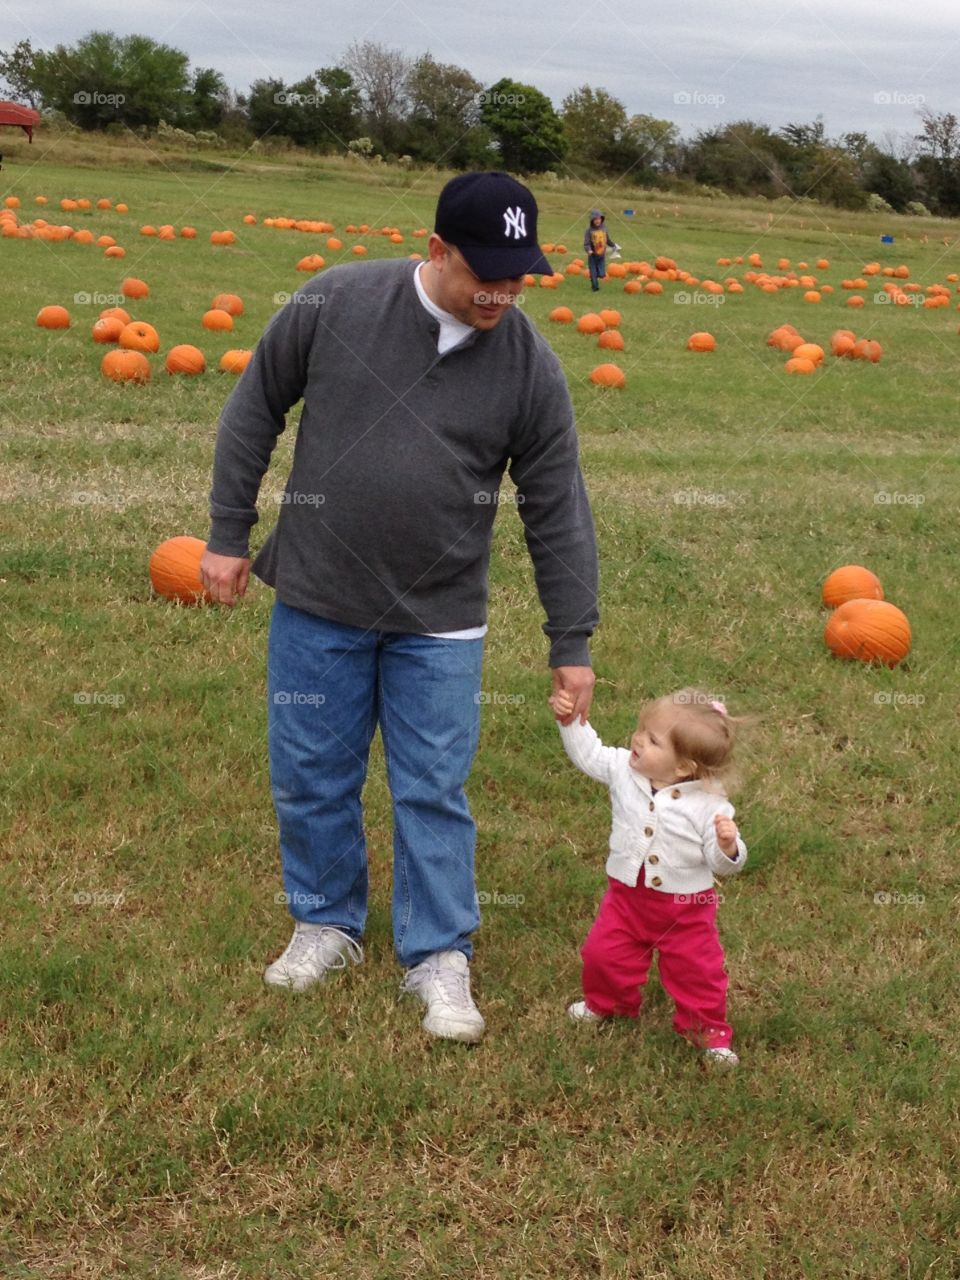 Walking through the pumpkins with daddy. 